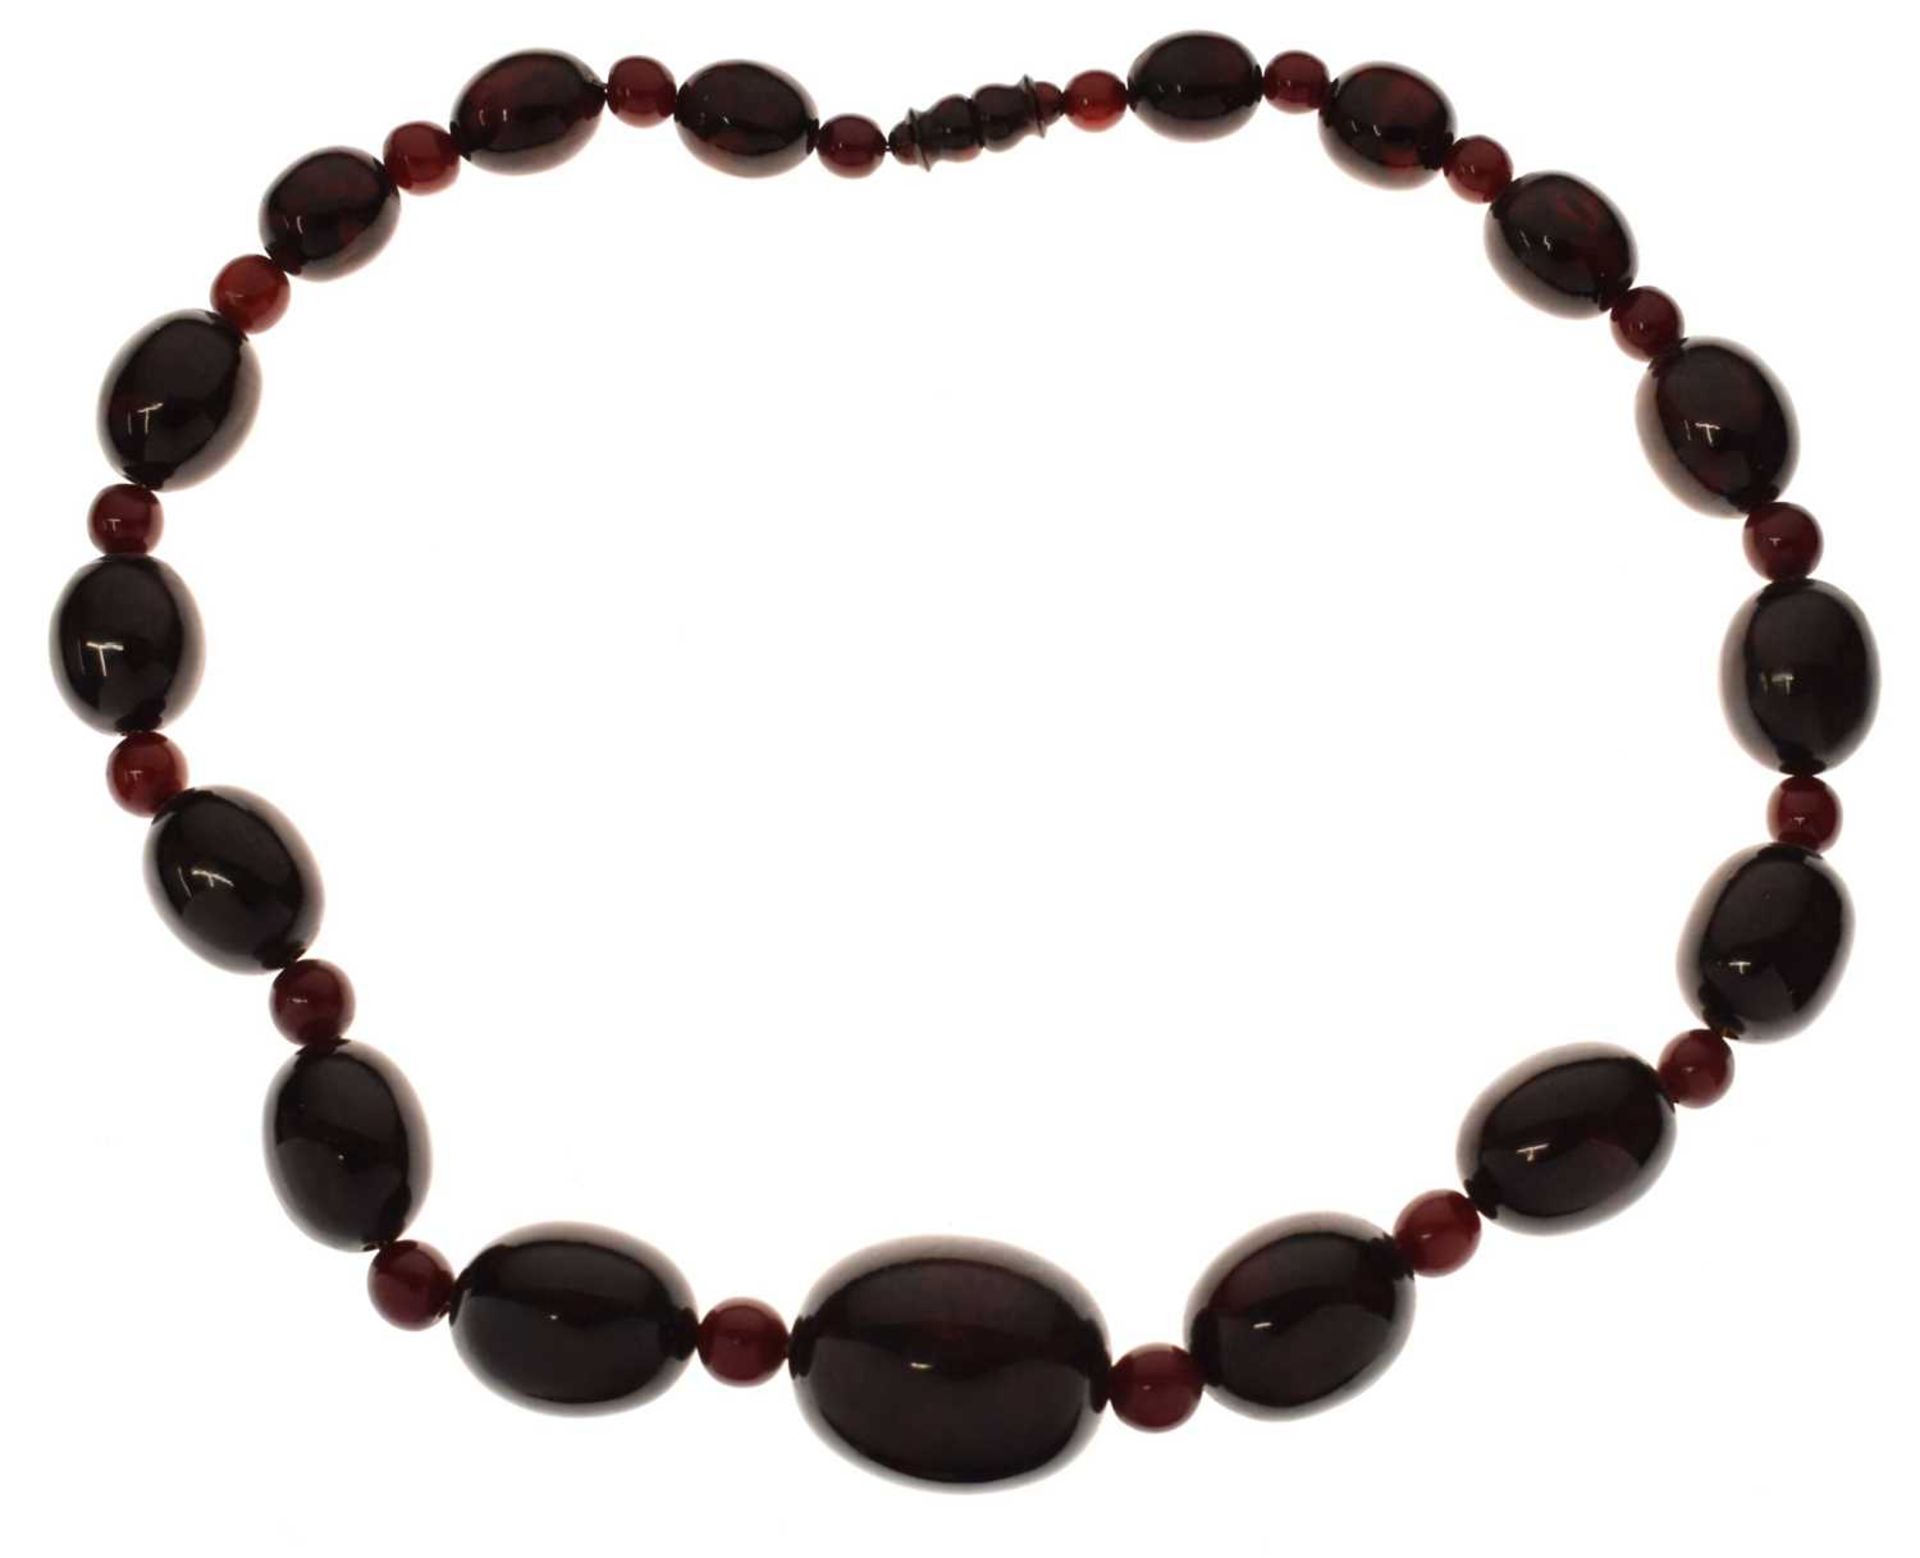 'Cherry amber' coloured bead necklace